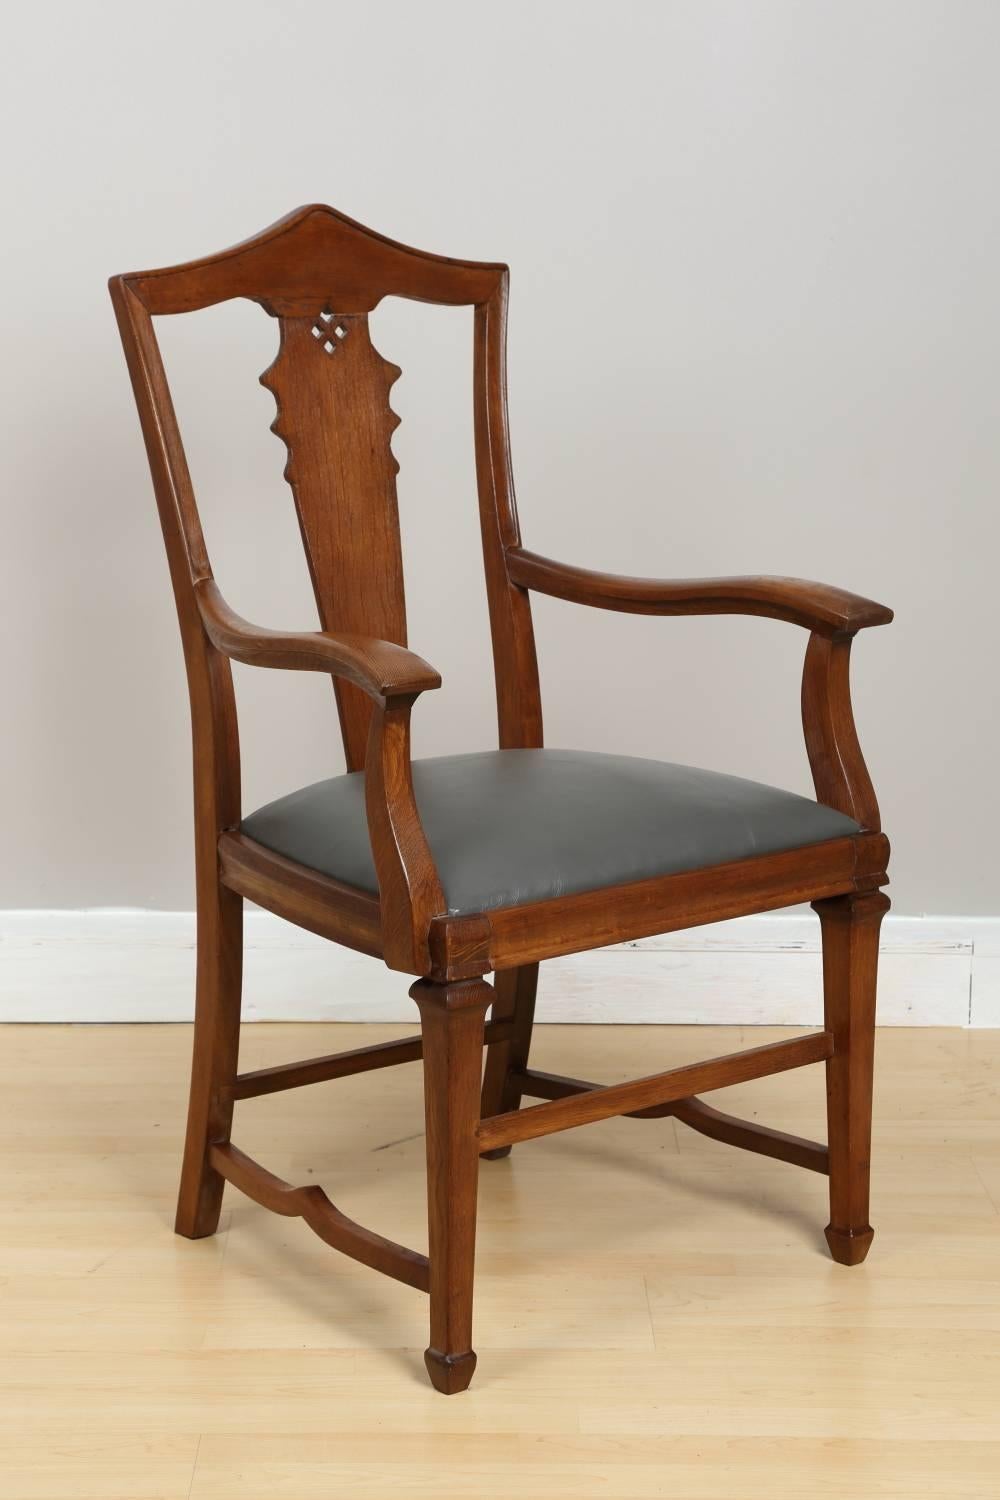 Oak armchair, circa 1910. This tall chair originated in Germany, it has been restored, reupholstered, and finished with semi gloss lacquer. Complimentary delivery and set up within 100 mile radius from Chicago, IL. Measures: Seat height 19